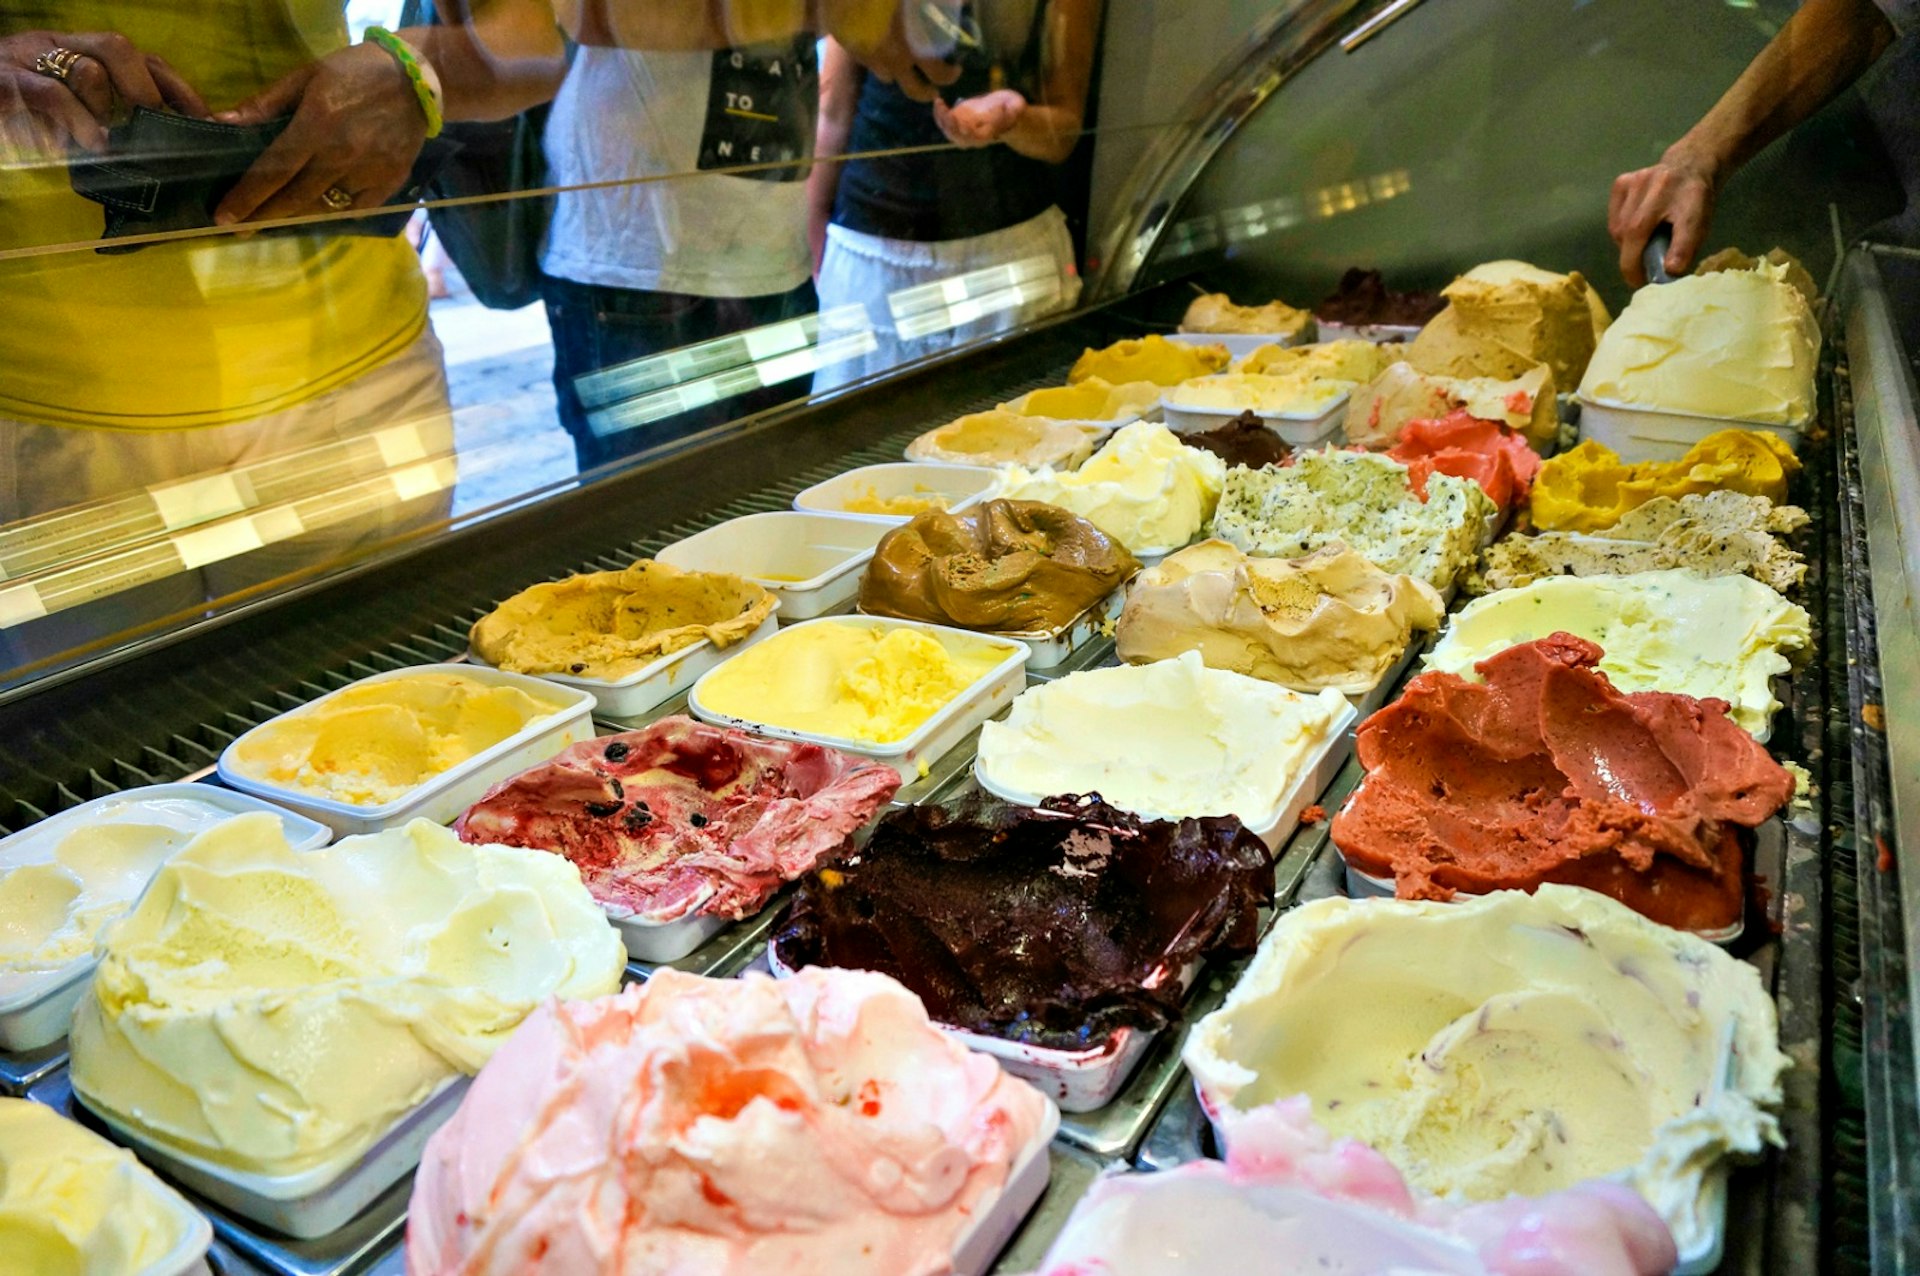 Terre Adélice has some 150 flavours to try. Image © Monica Suma / Lonely Planet